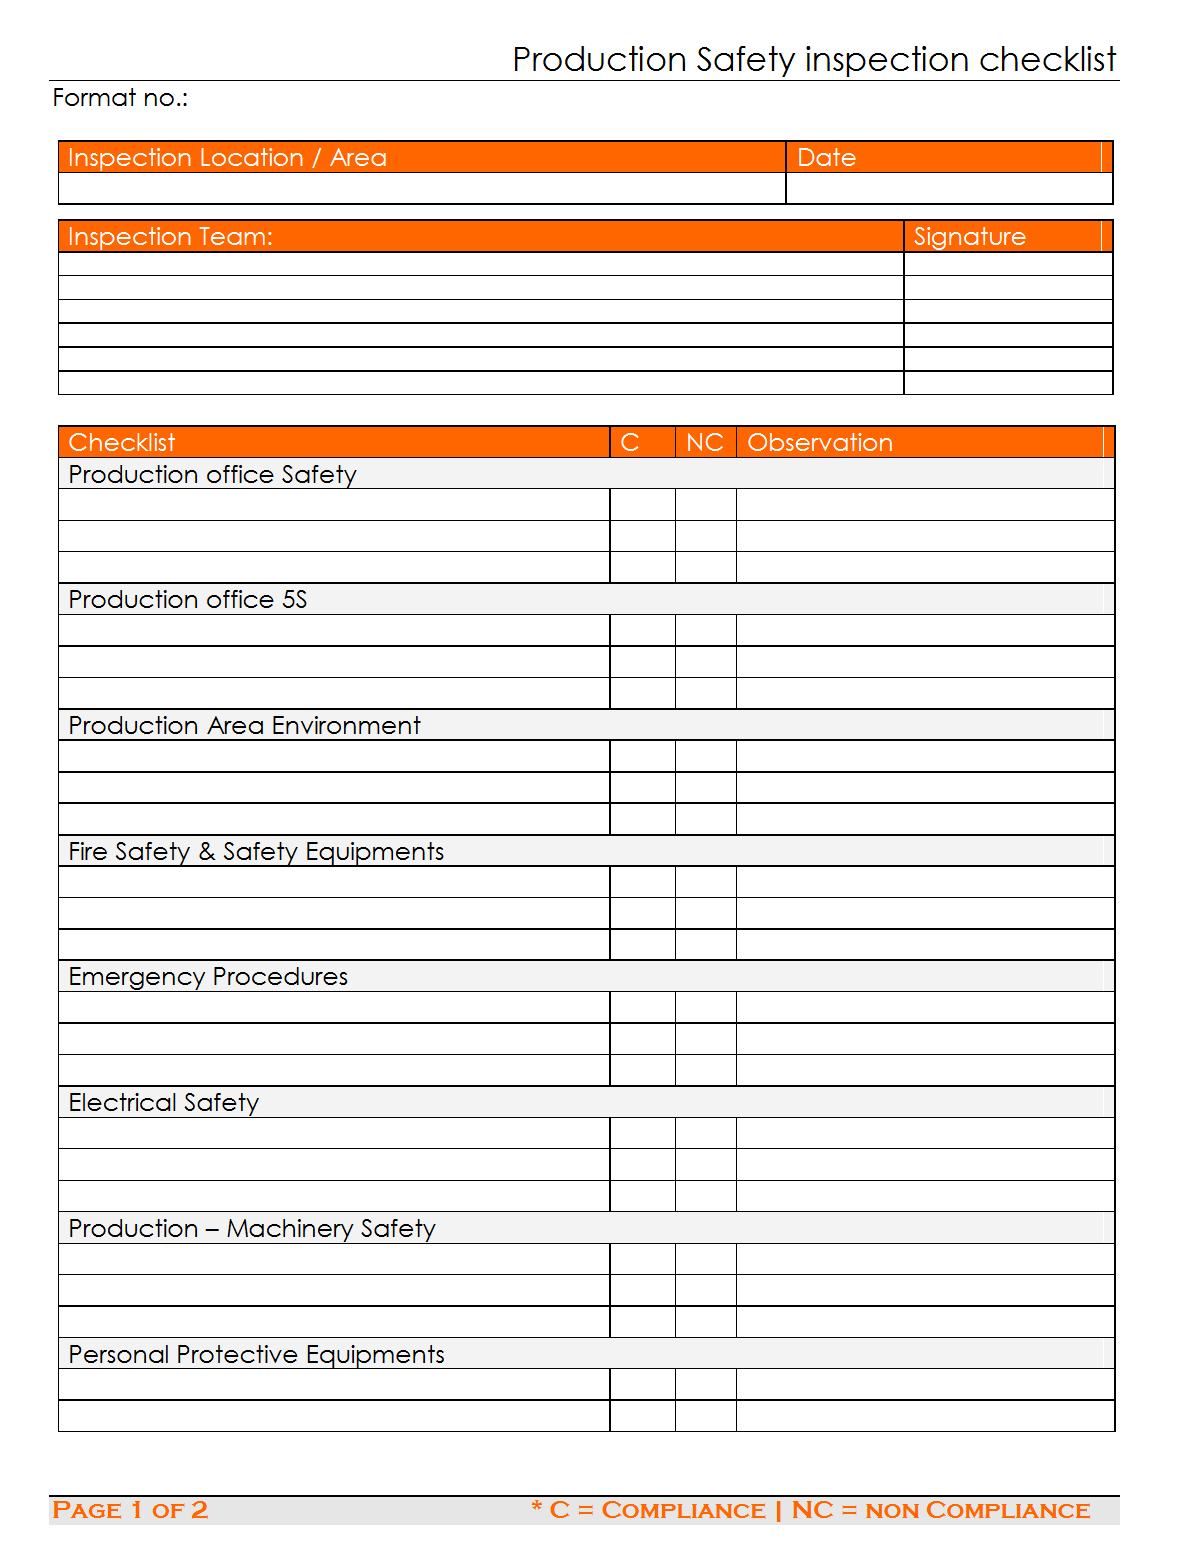 Production safety inspection checklist template Within Safety Inspection Checklist Template Within Safety Inspection Checklist Template